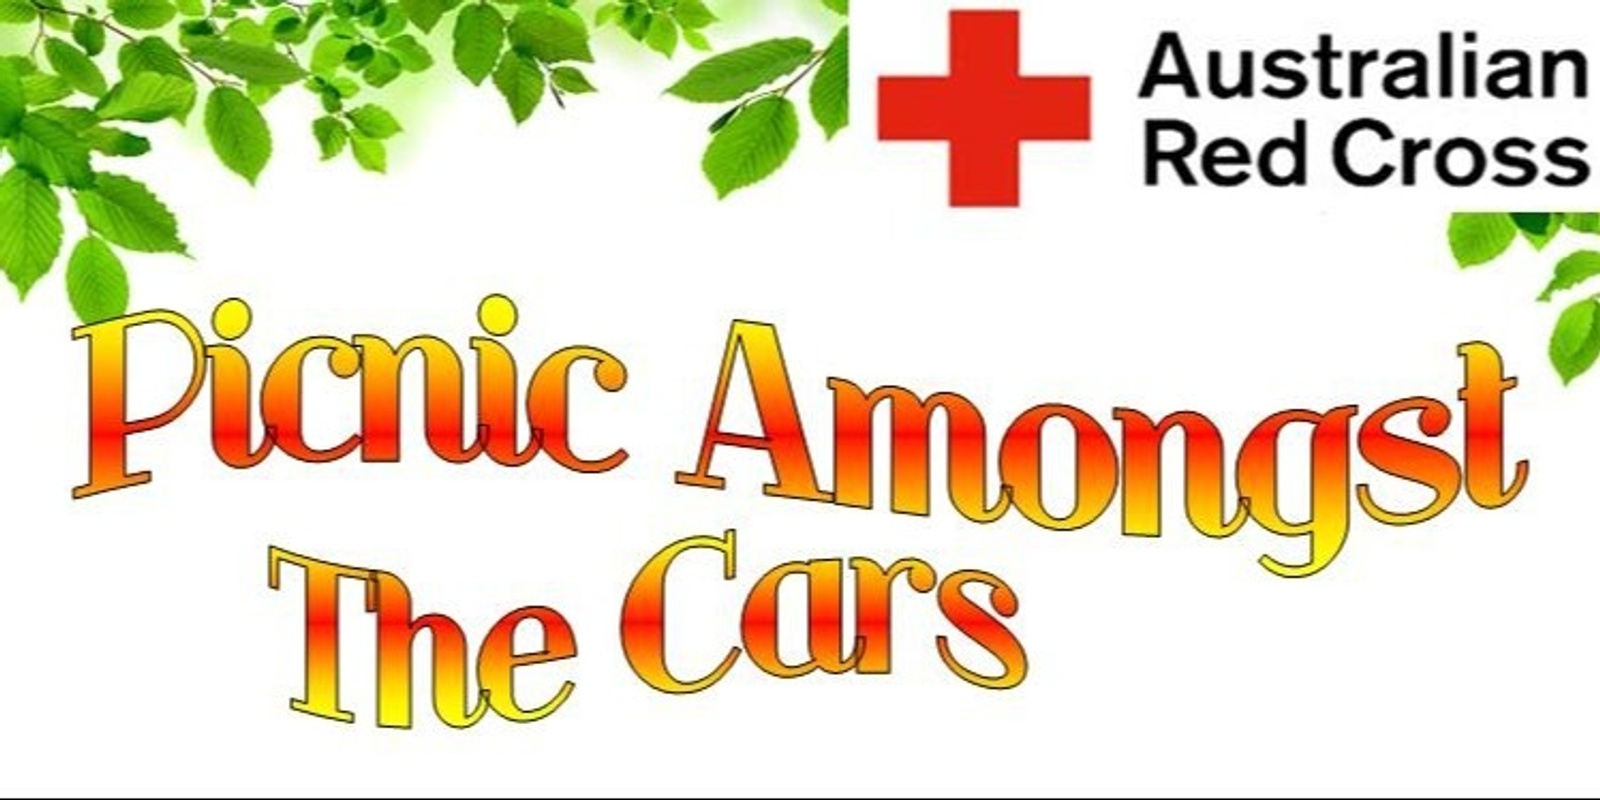 Banner image for Picnic Amongst The Cars 